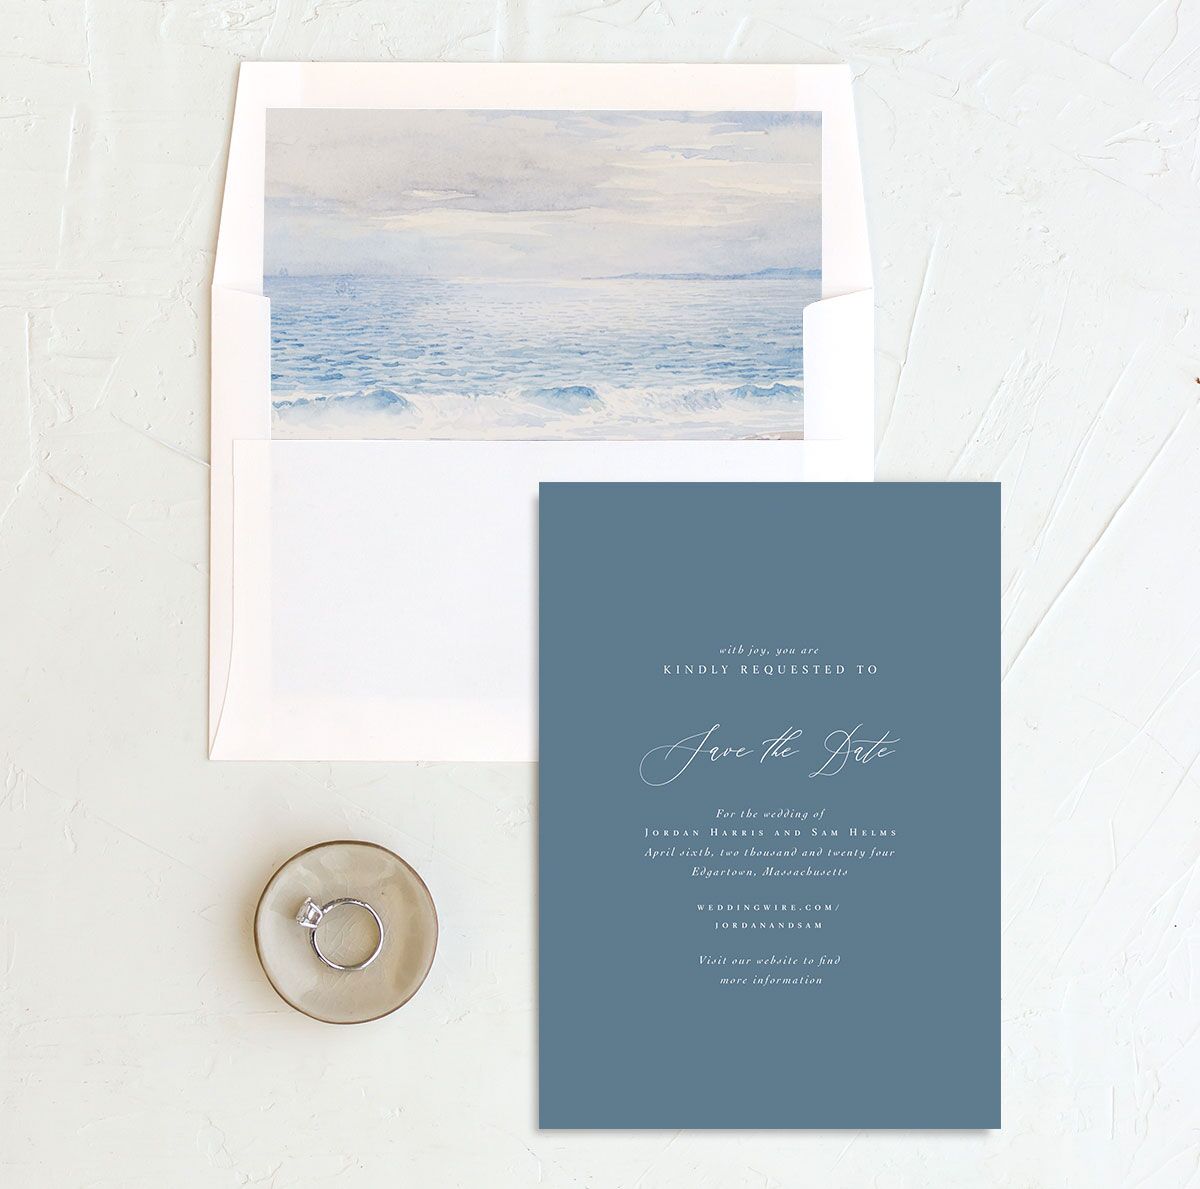 Ocean Waves Save the Date Cards envelope-and-liner in blue